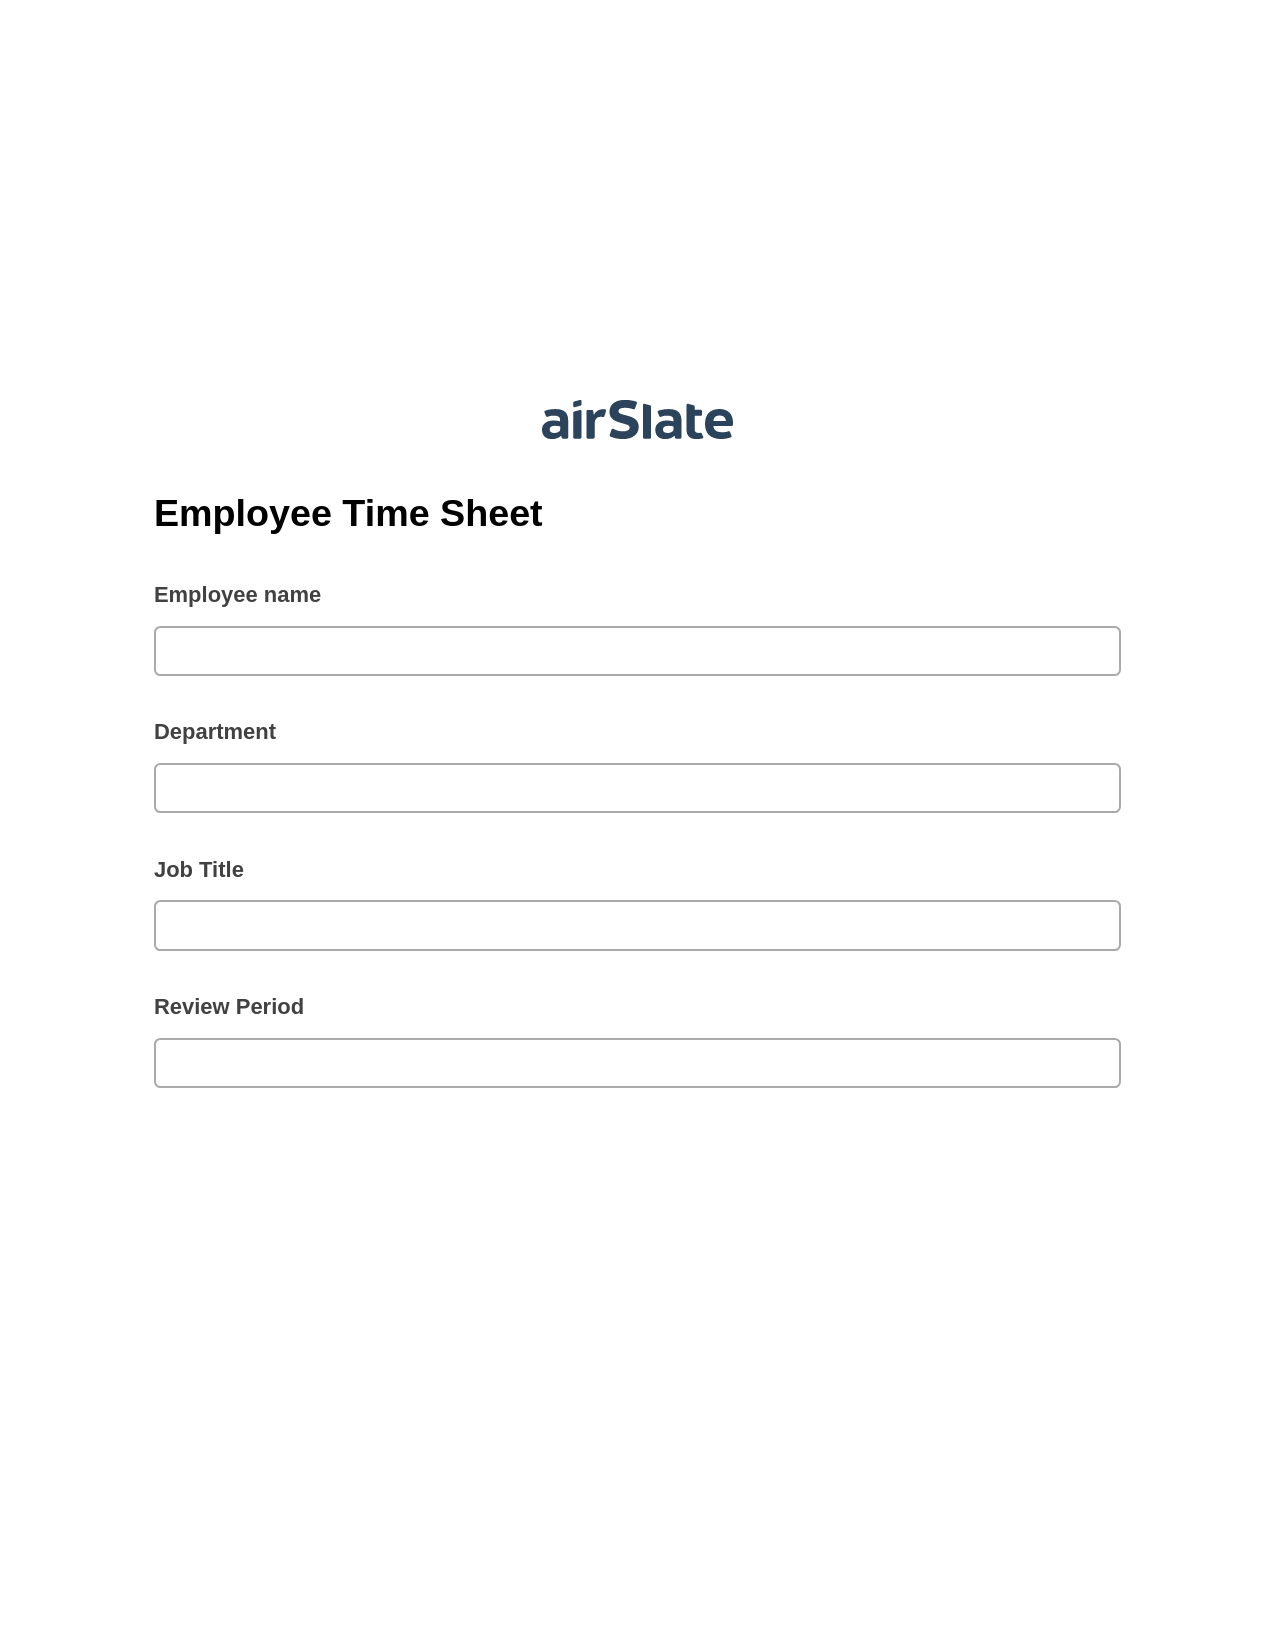 Multirole Employee Time Sheet Pre-fill Document Bot, Create Salesforce Records Bot, Export to NetSuite Bot